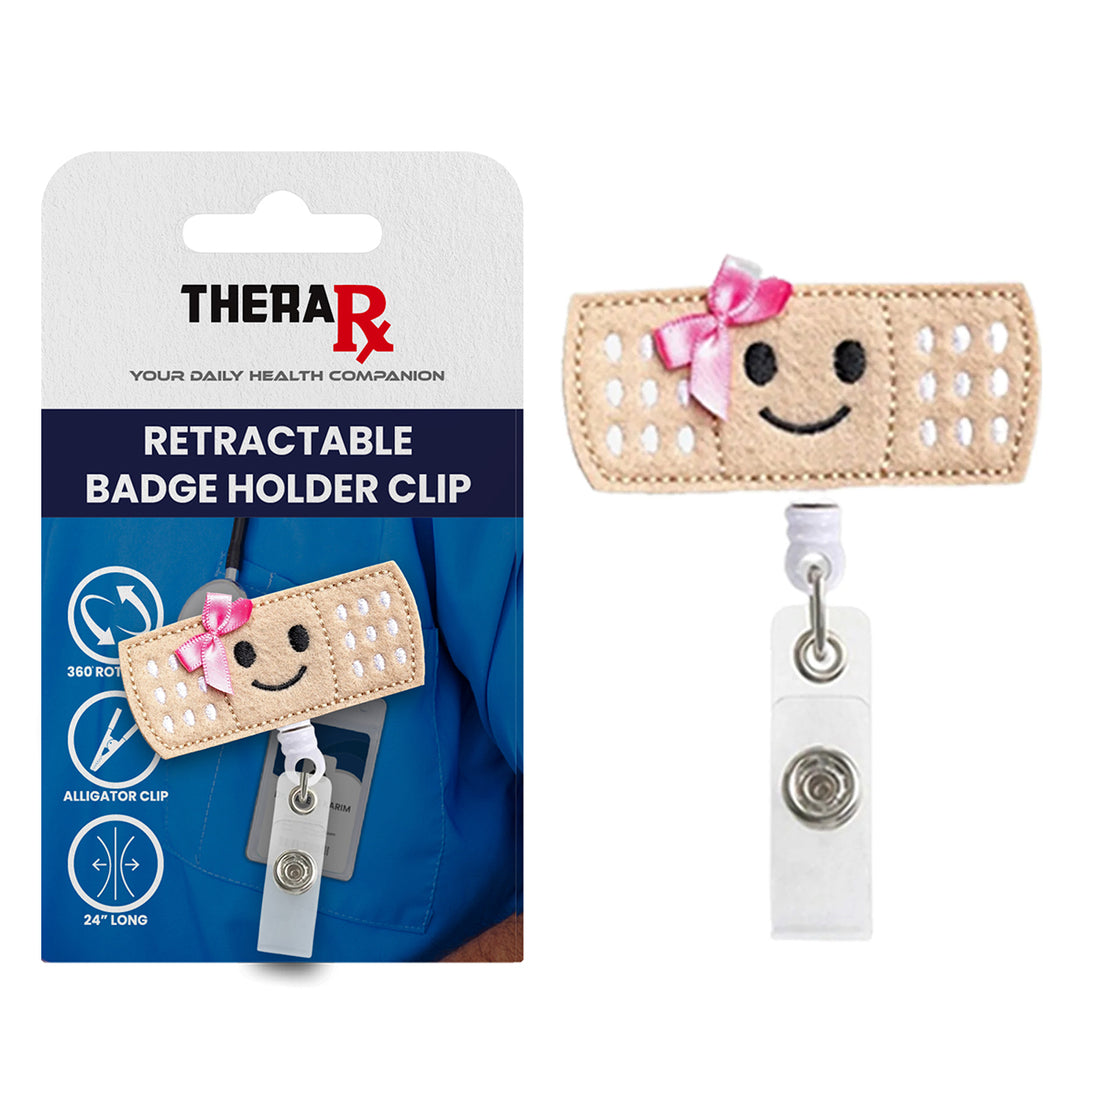 Retractable Badge Holder Clips for Professionals